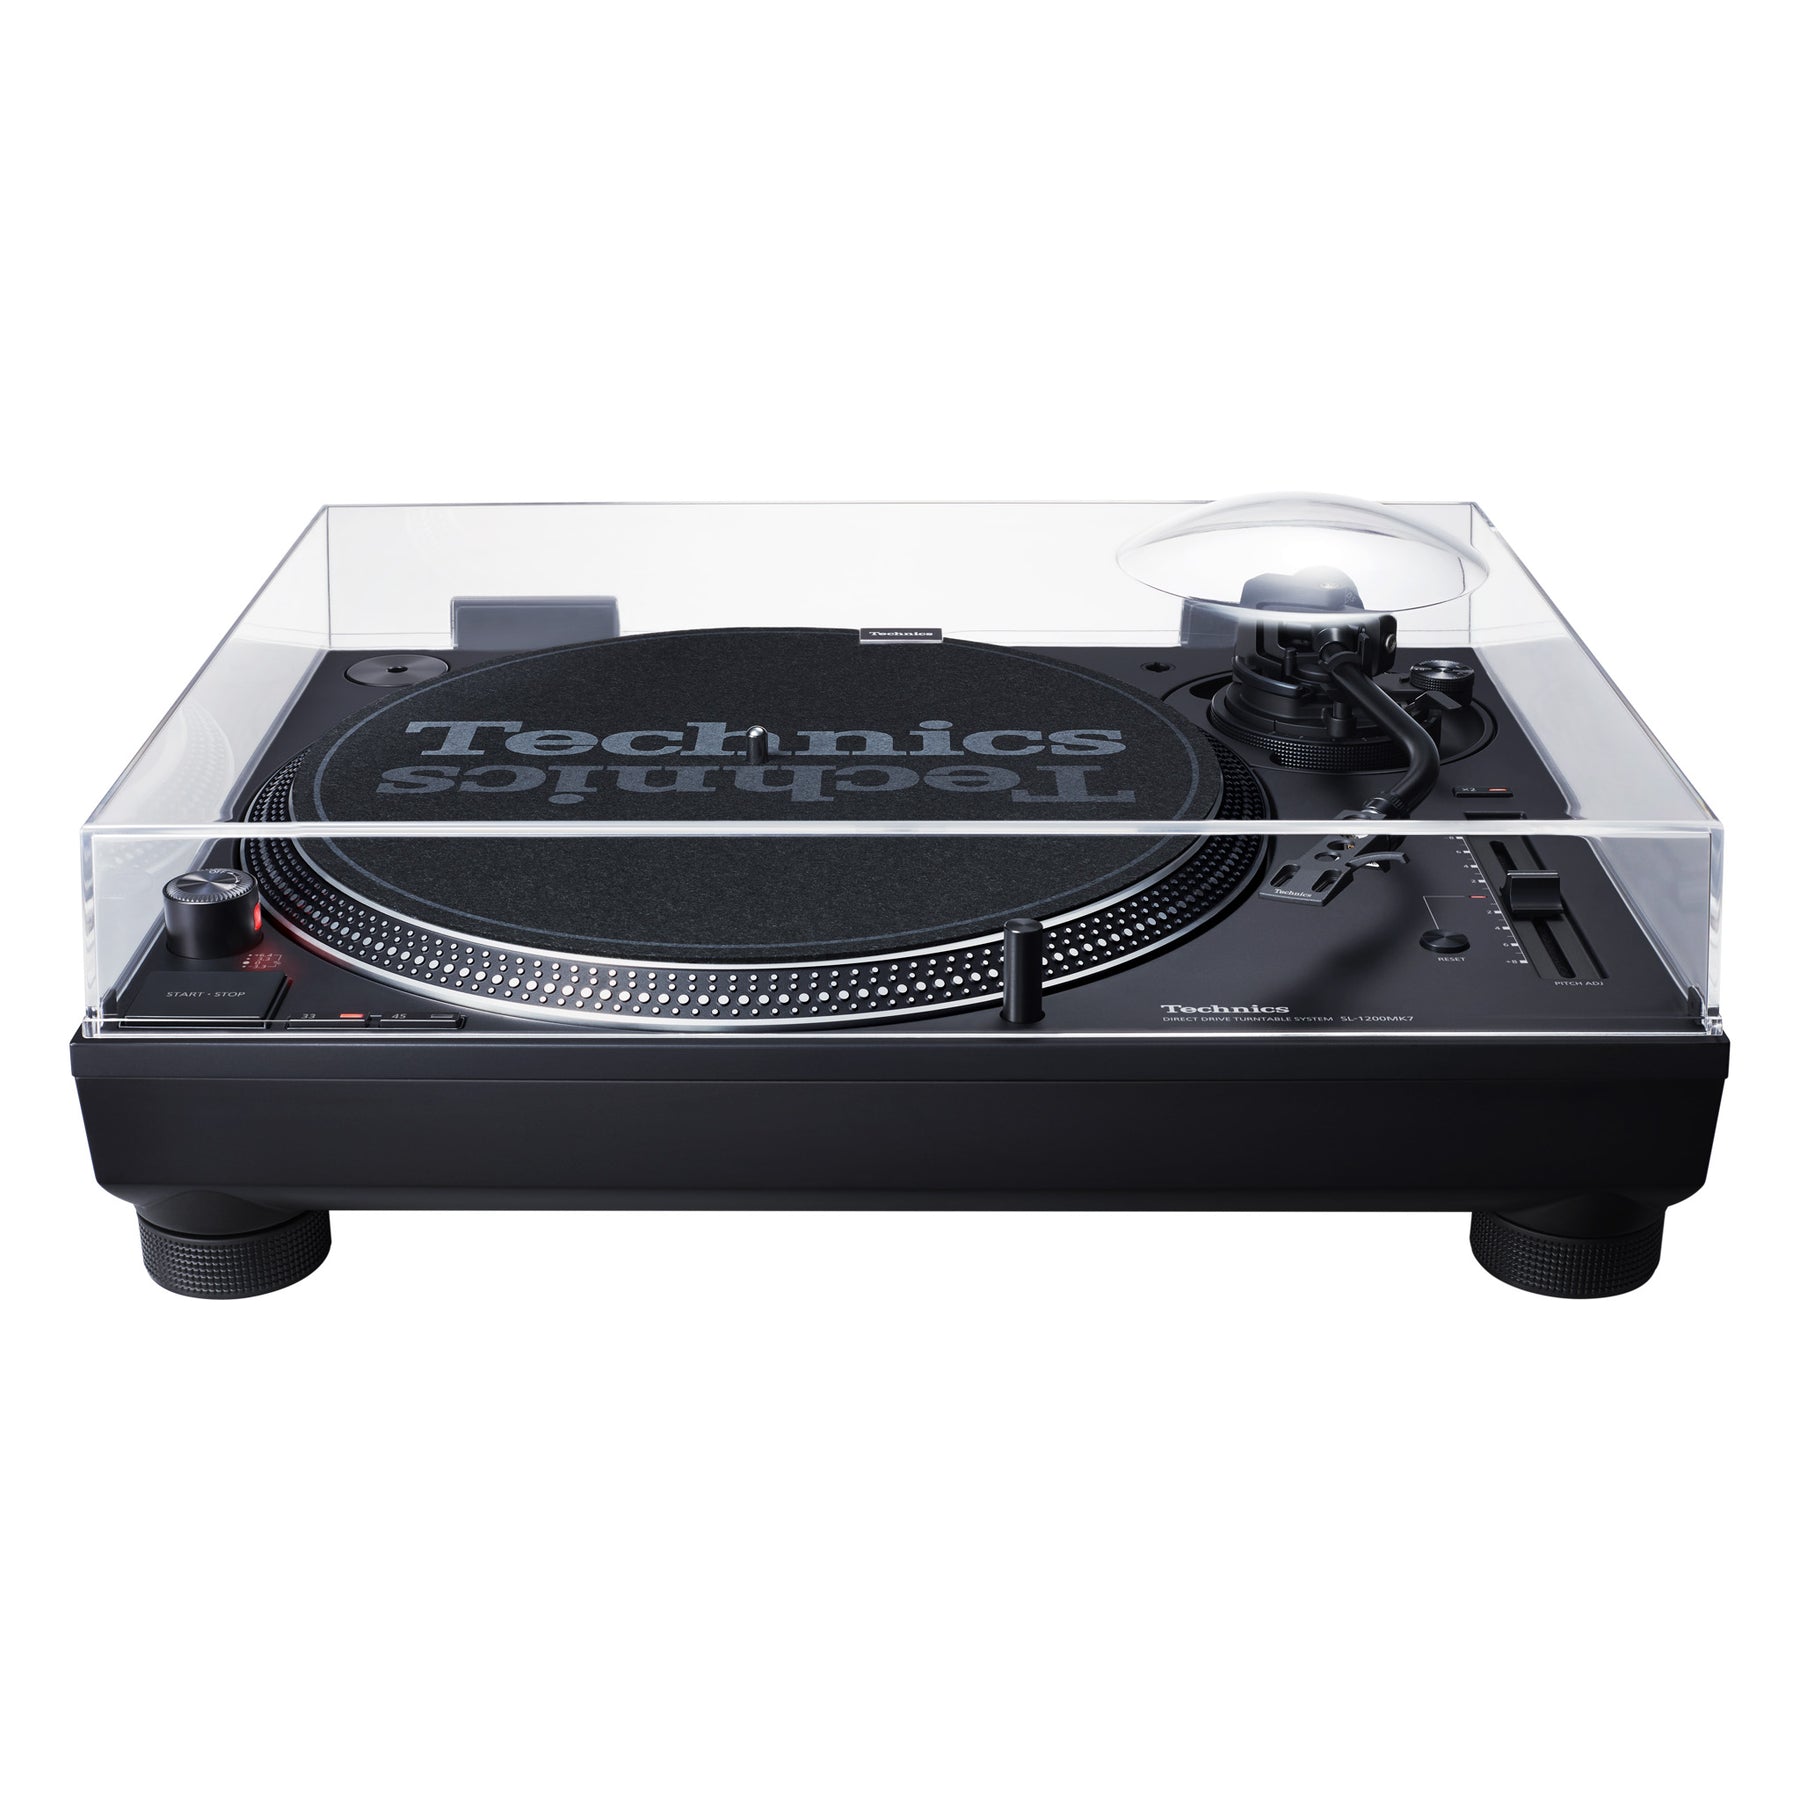 Direct Drive Turntable System SL-1200MK7